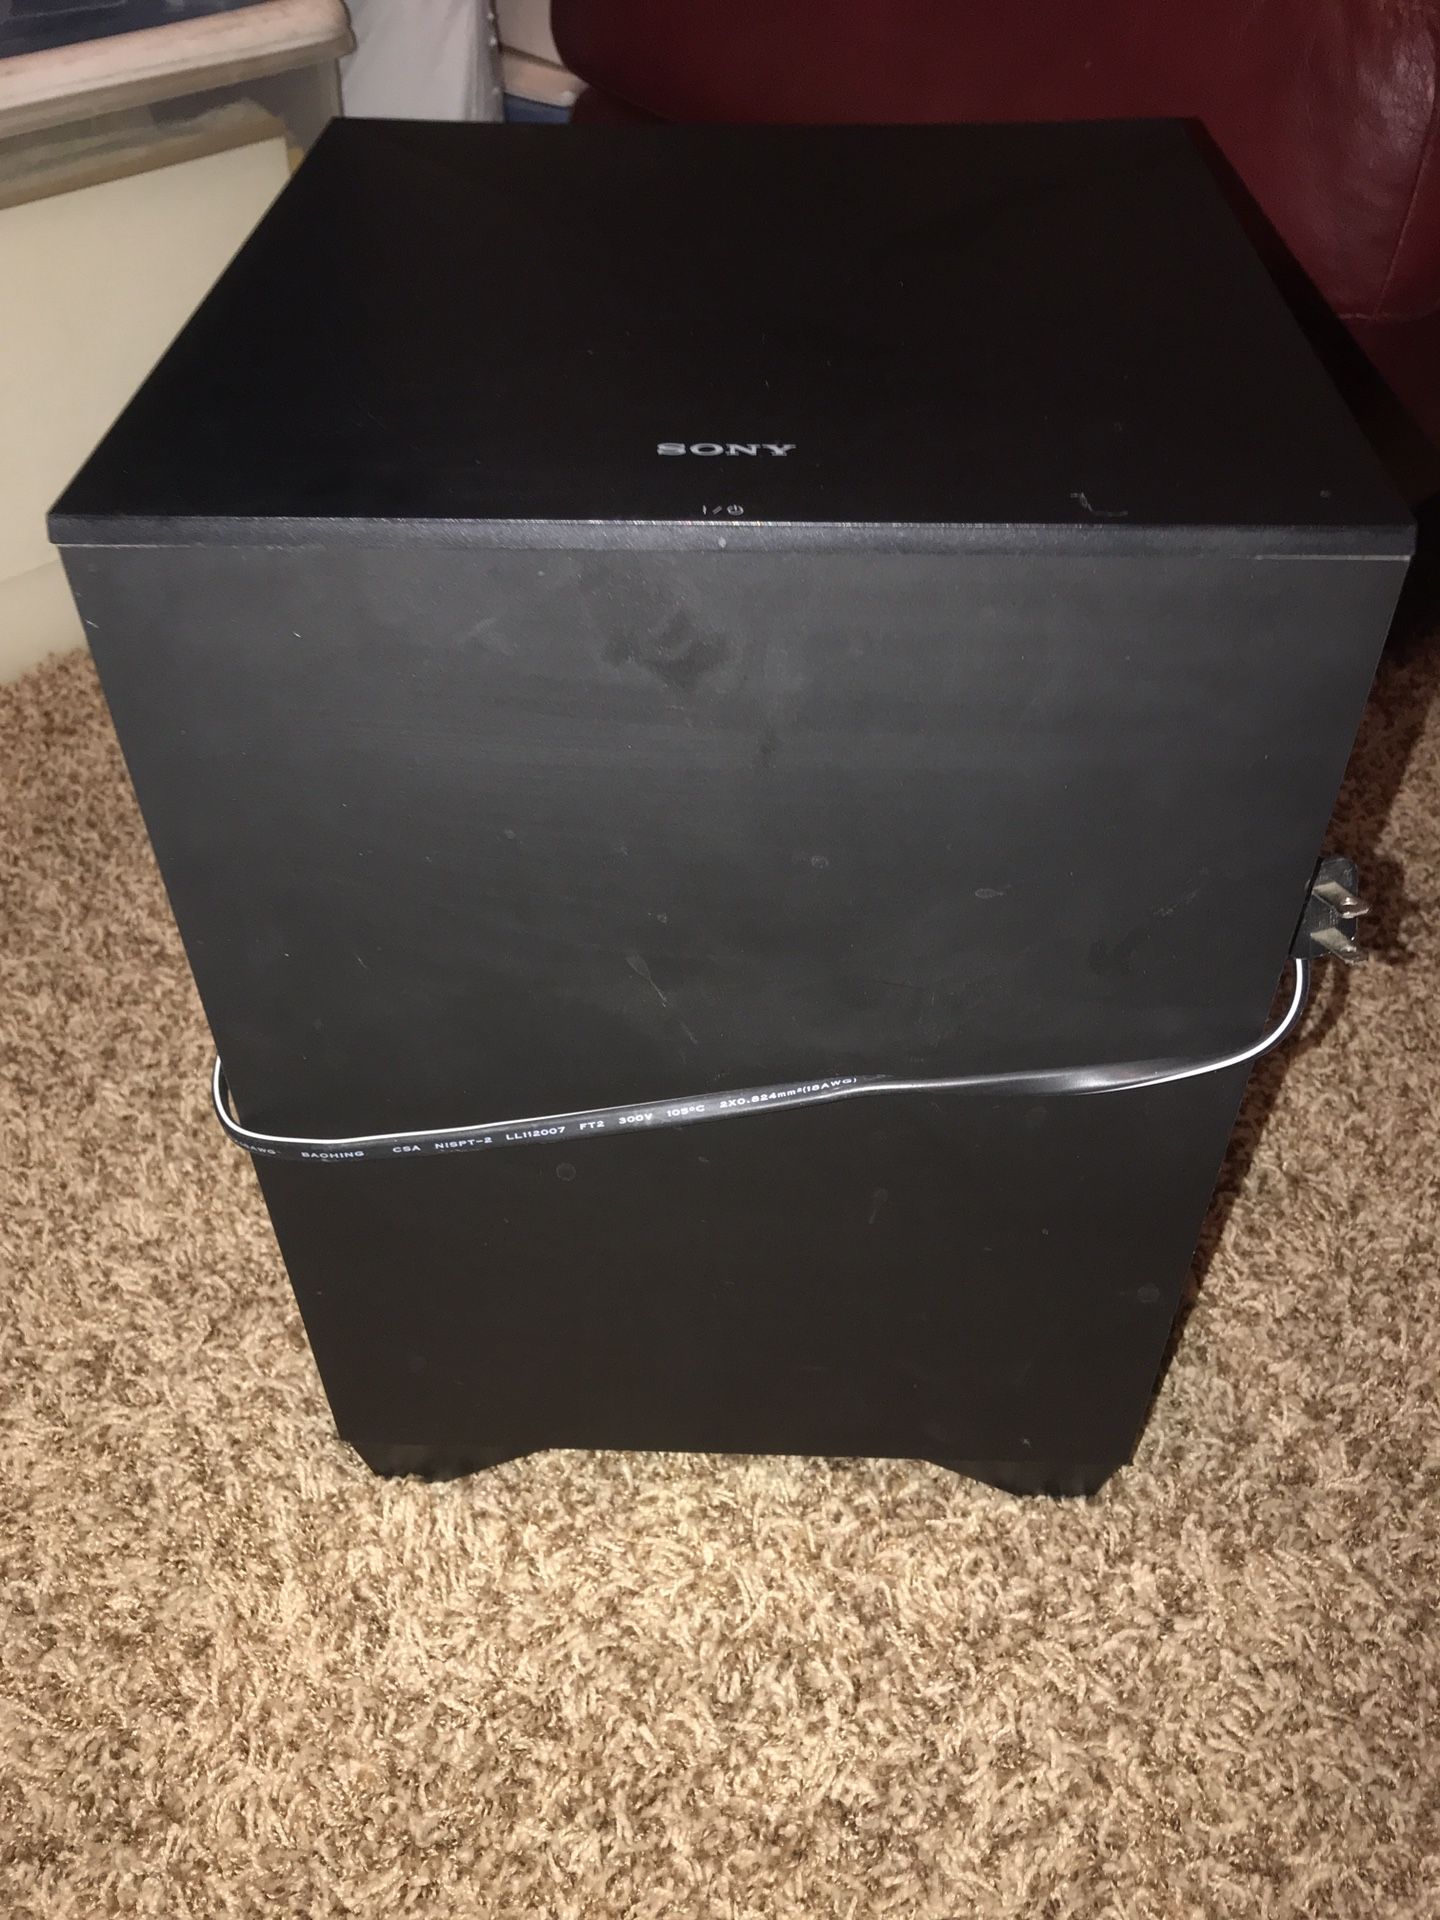 Sony Bluetooth Home Theater Subwoofer